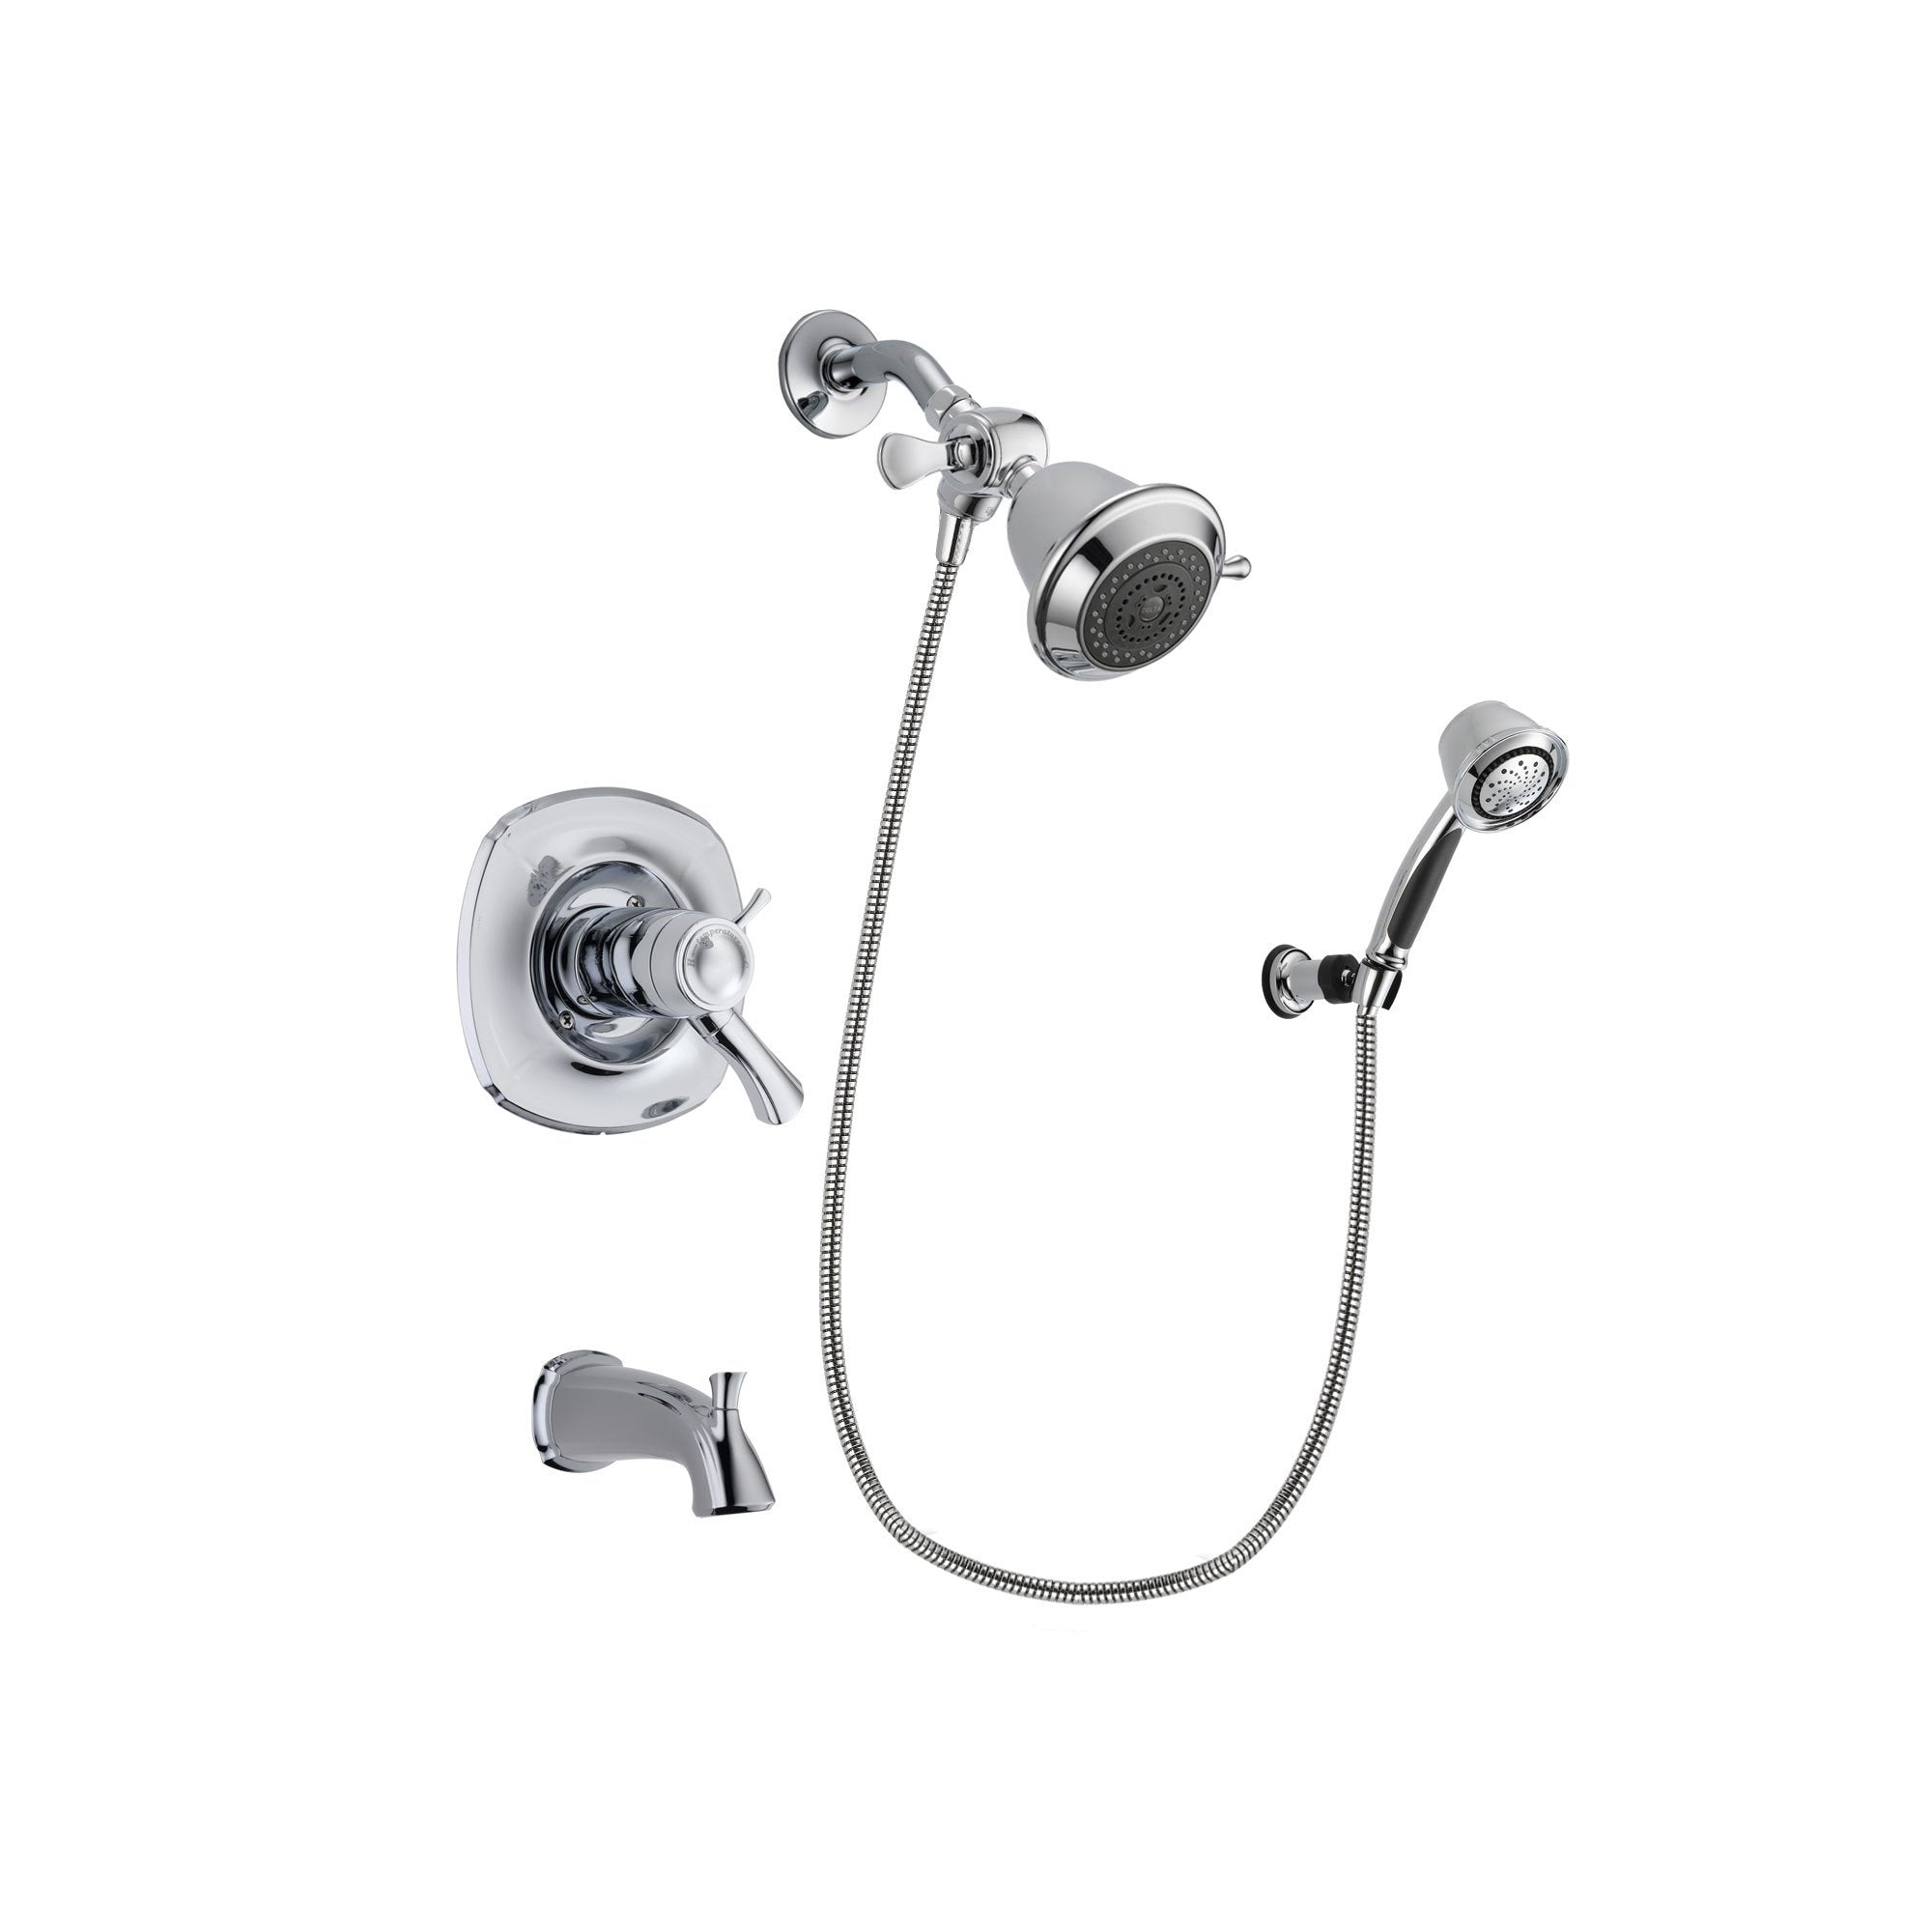 Delta Addison Chrome Finish Thermostatic Tub and Shower Faucet System Package with Shower Head and 5-Spray Adjustable Wall Mount Hand Shower Includes Rough-in Valve and Tub Spout DSP0295V